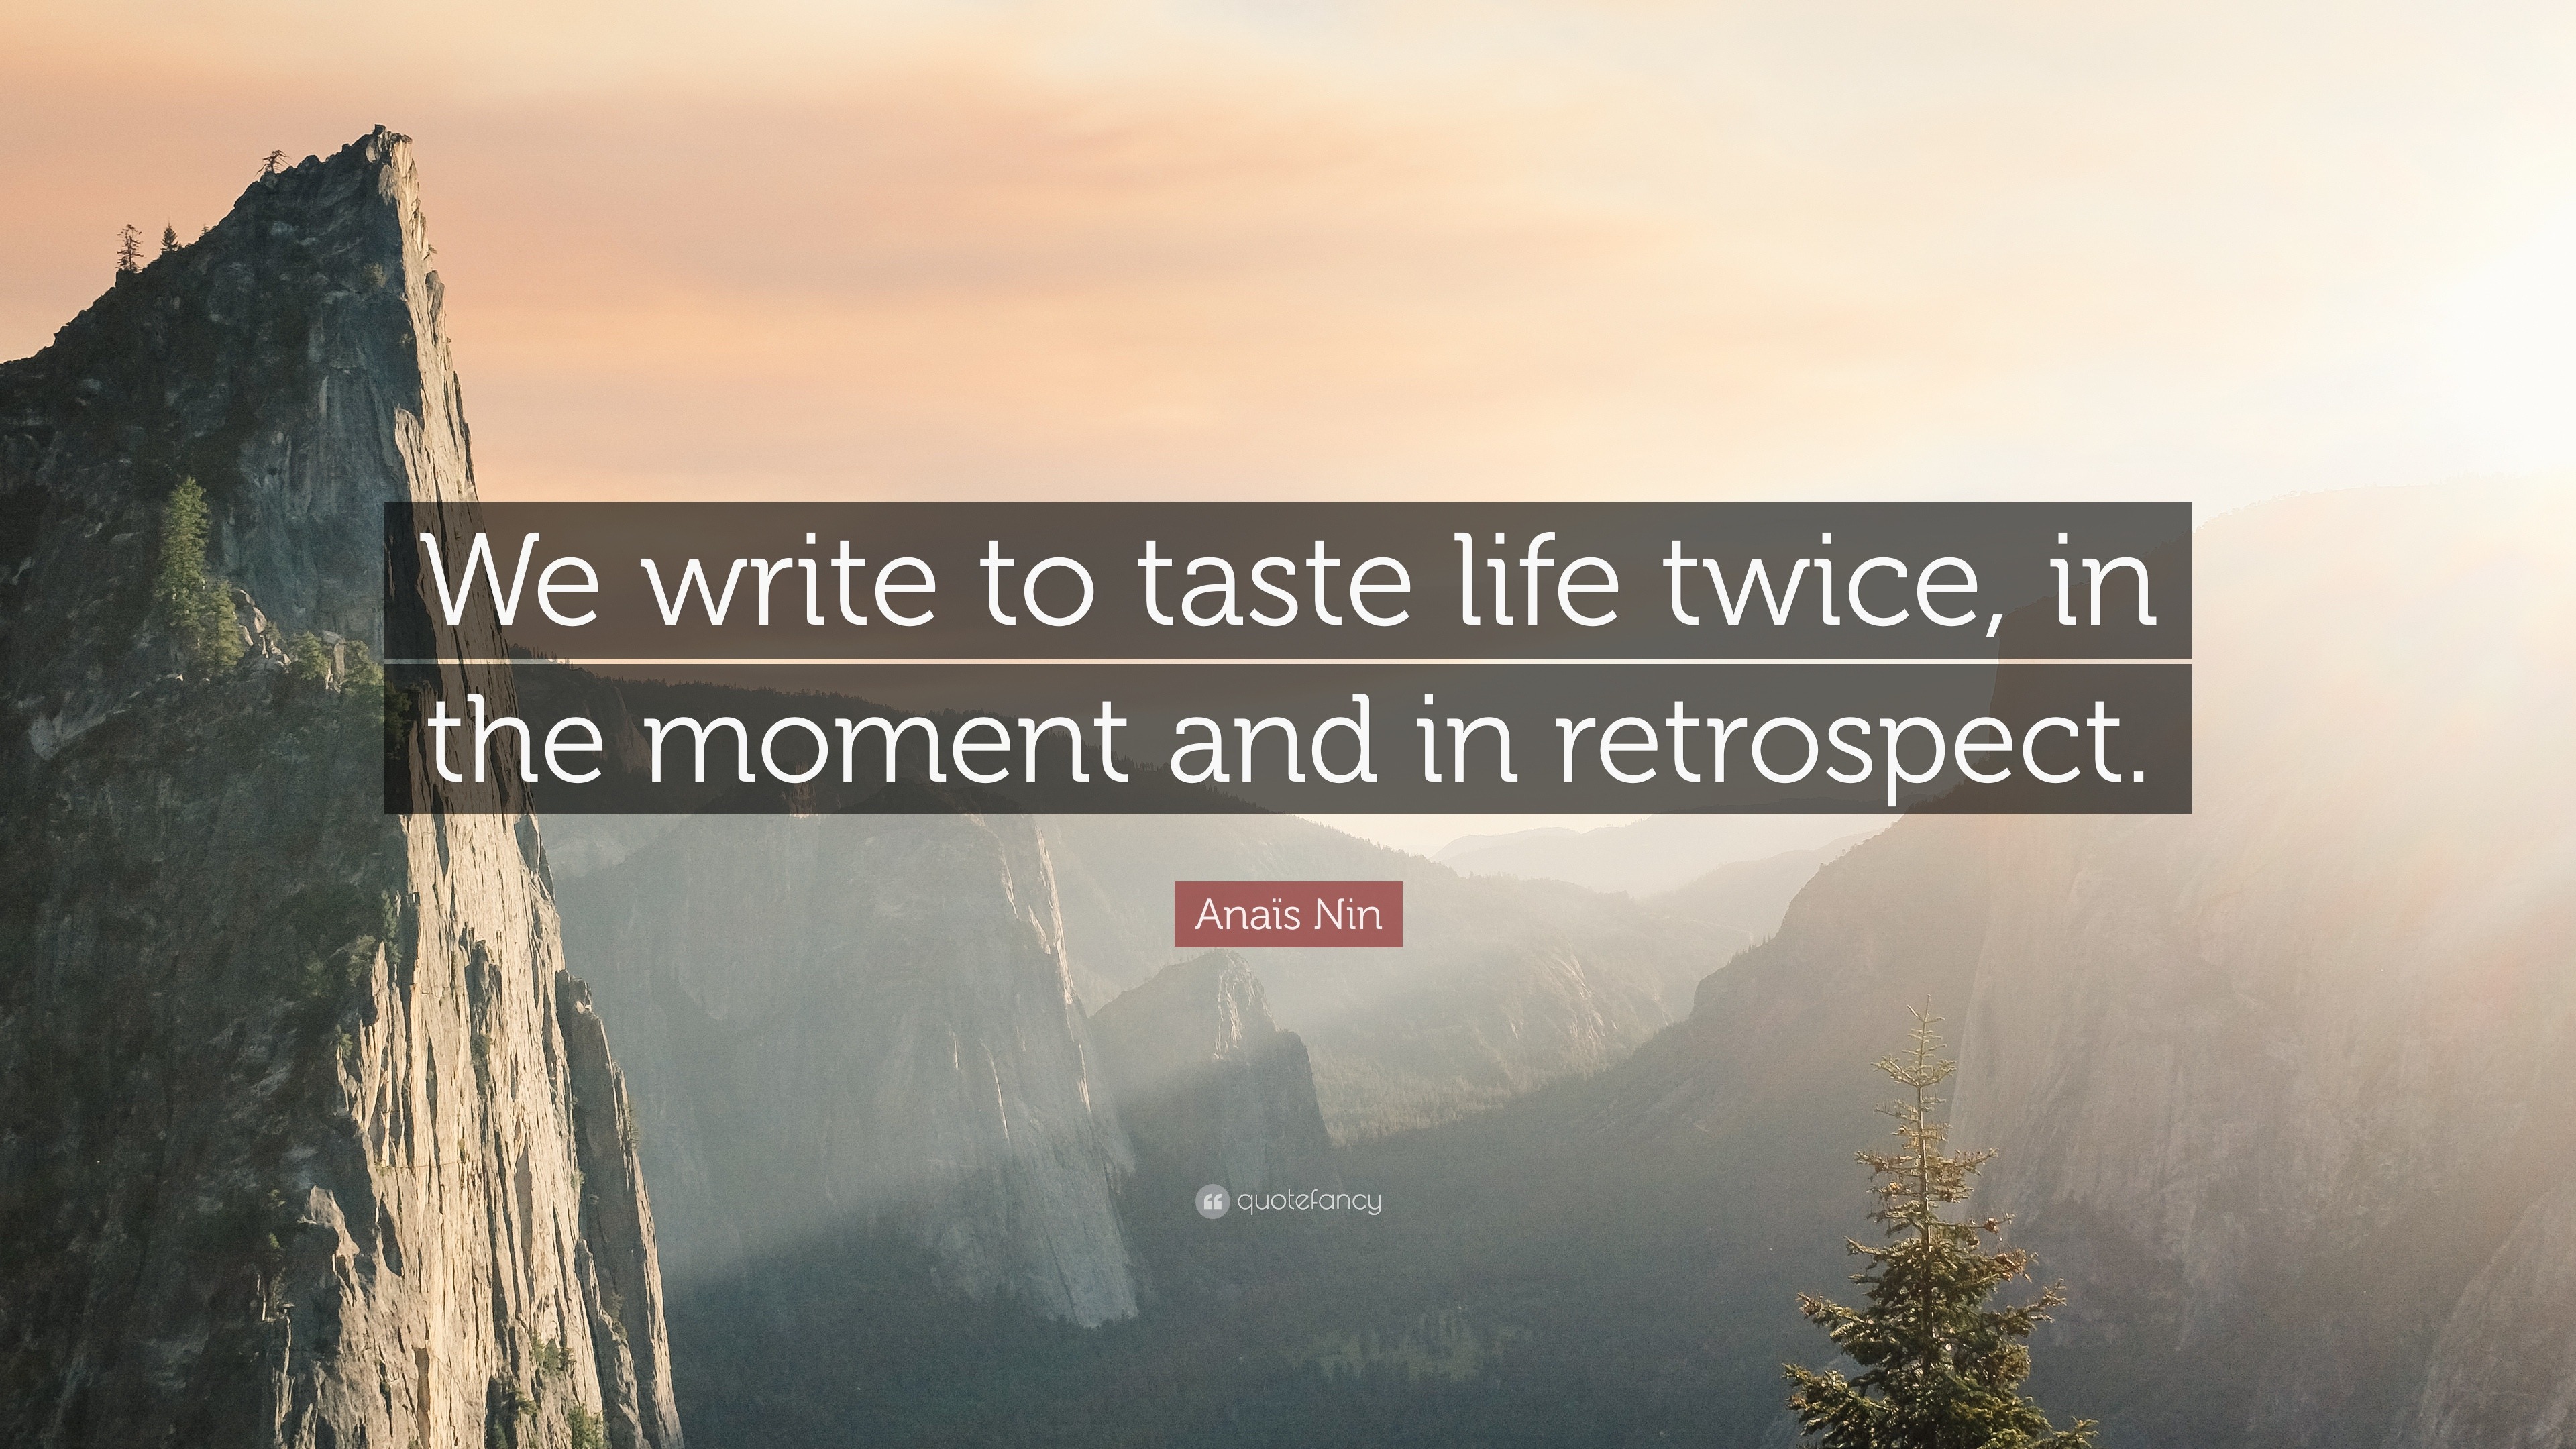 https://quotefancy.com/media/wallpaper/3840x2160/19581-Ana-s-Nin-Quote-We-write-to-taste-life-twice-in-the-moment-and-in.jpg